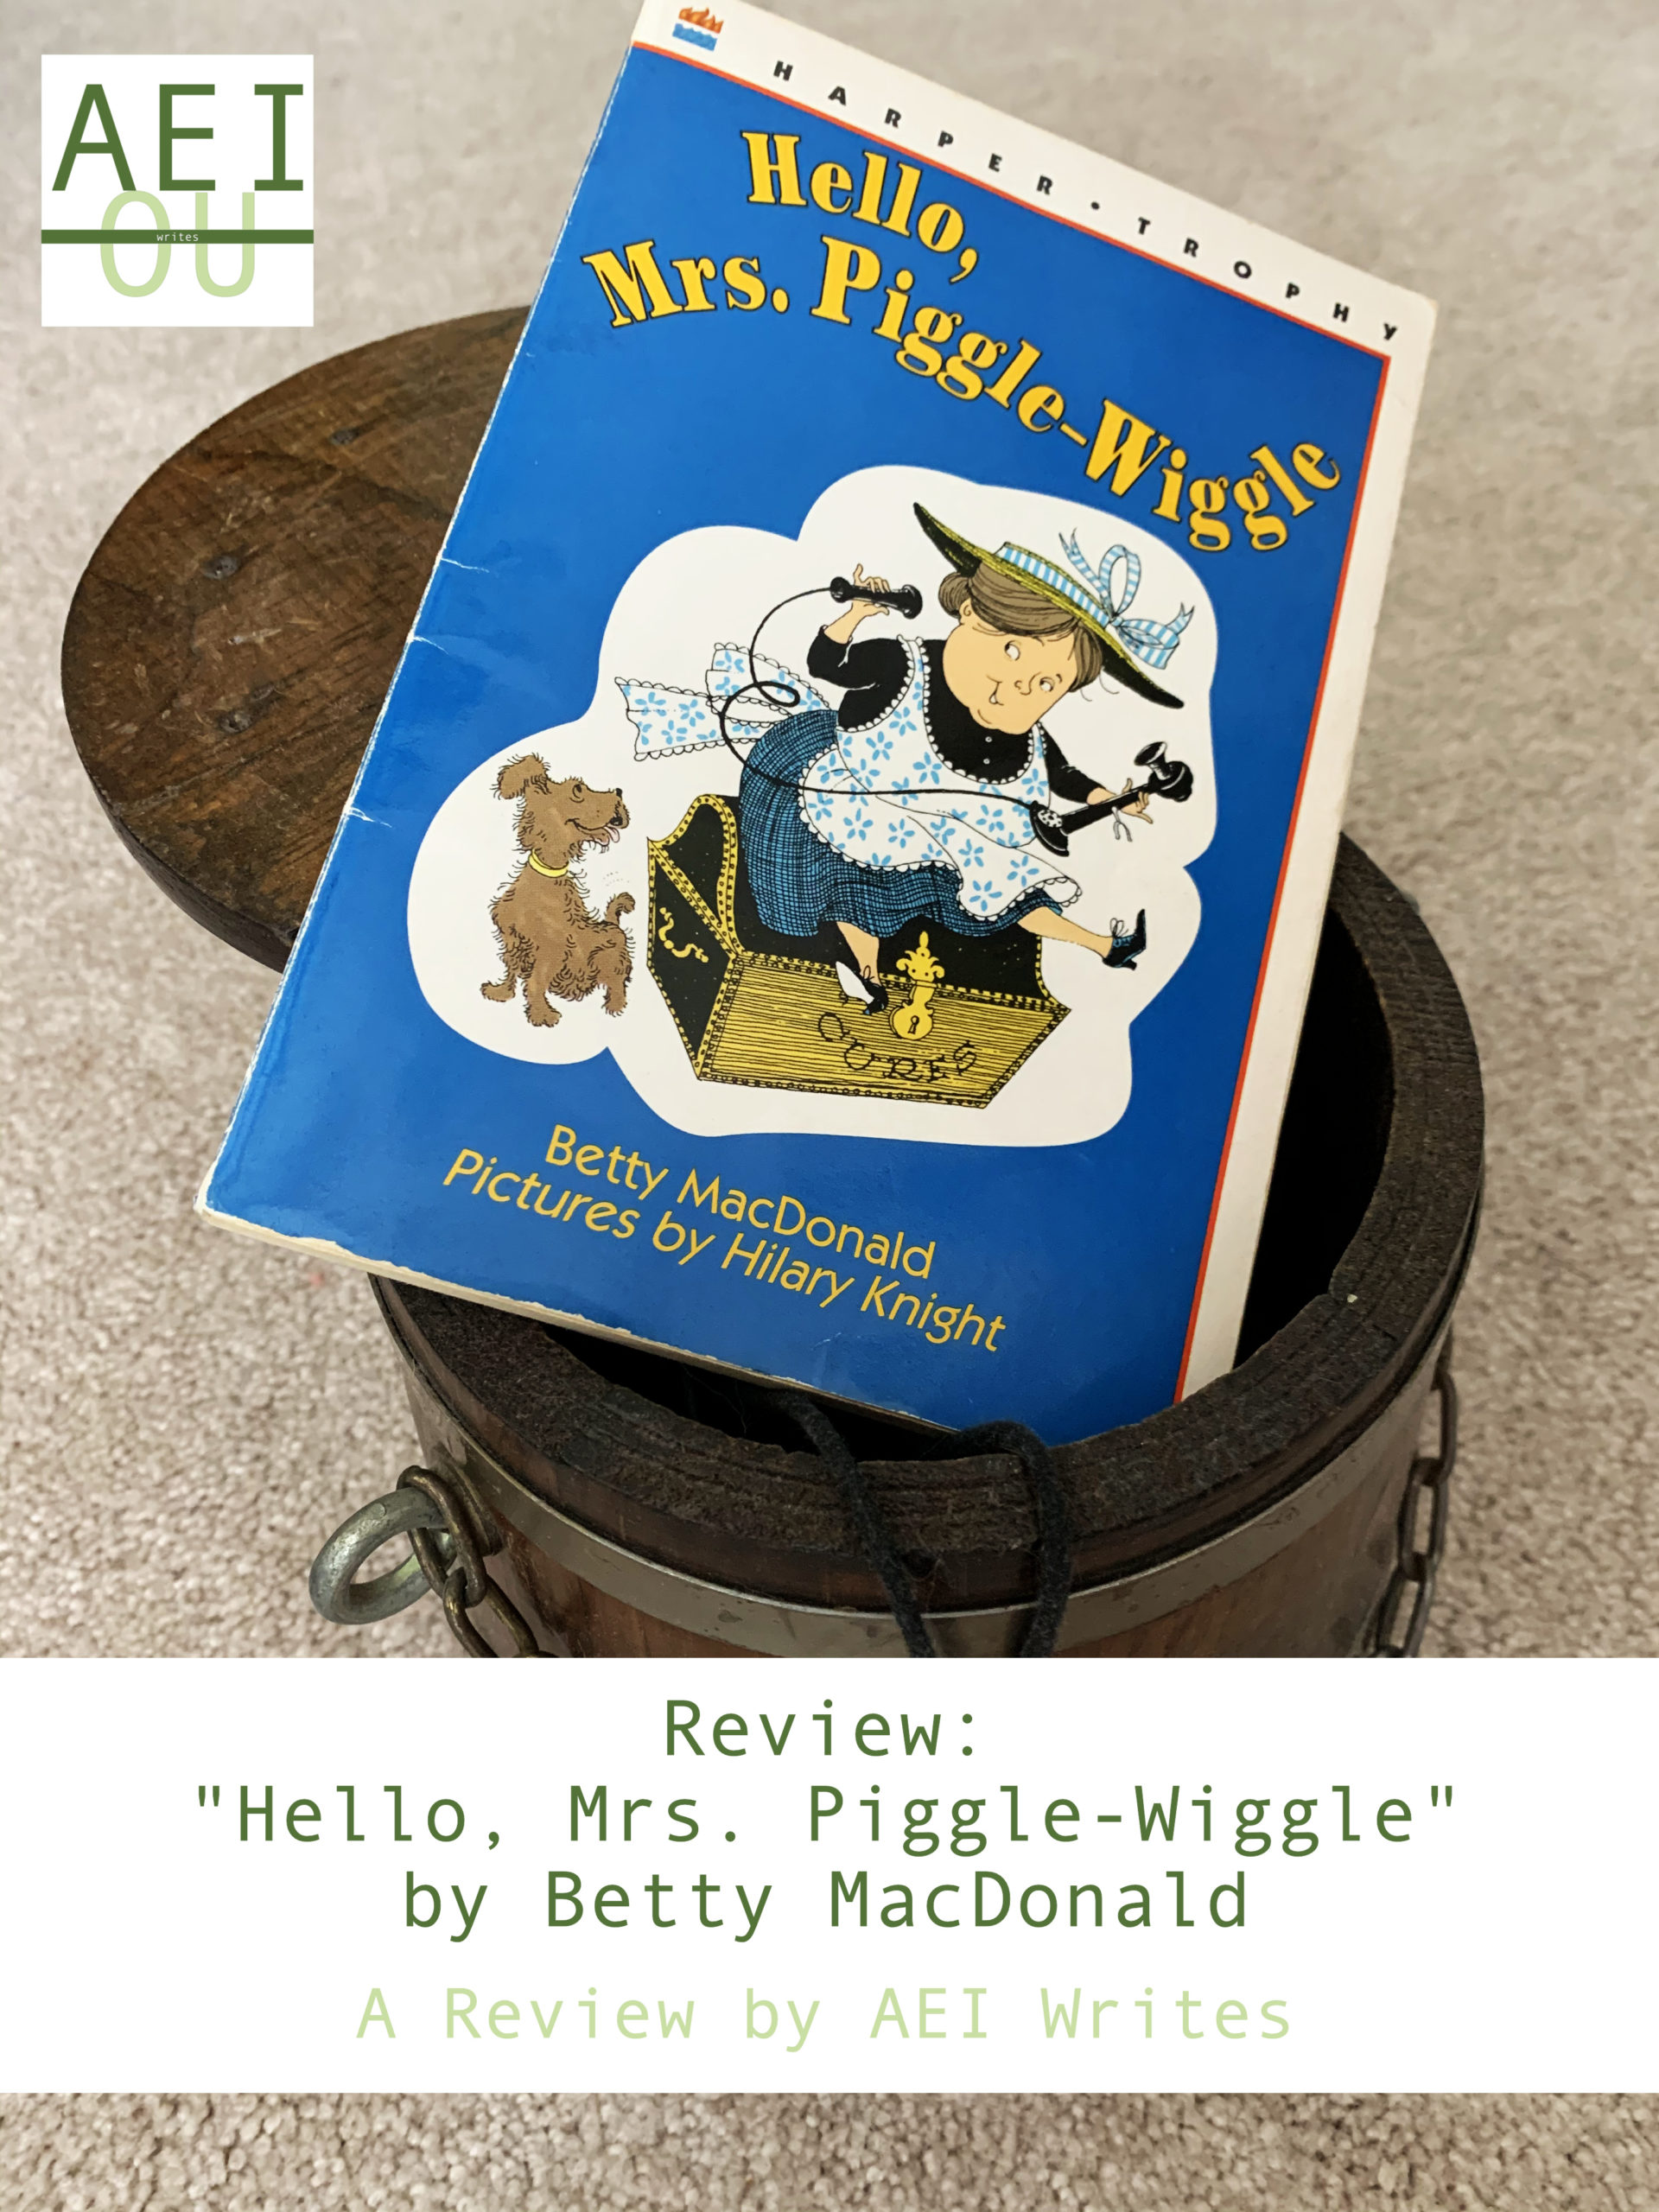 Review: “Hello, Mrs. Piggle-Wiggle” by Betty MacDonald